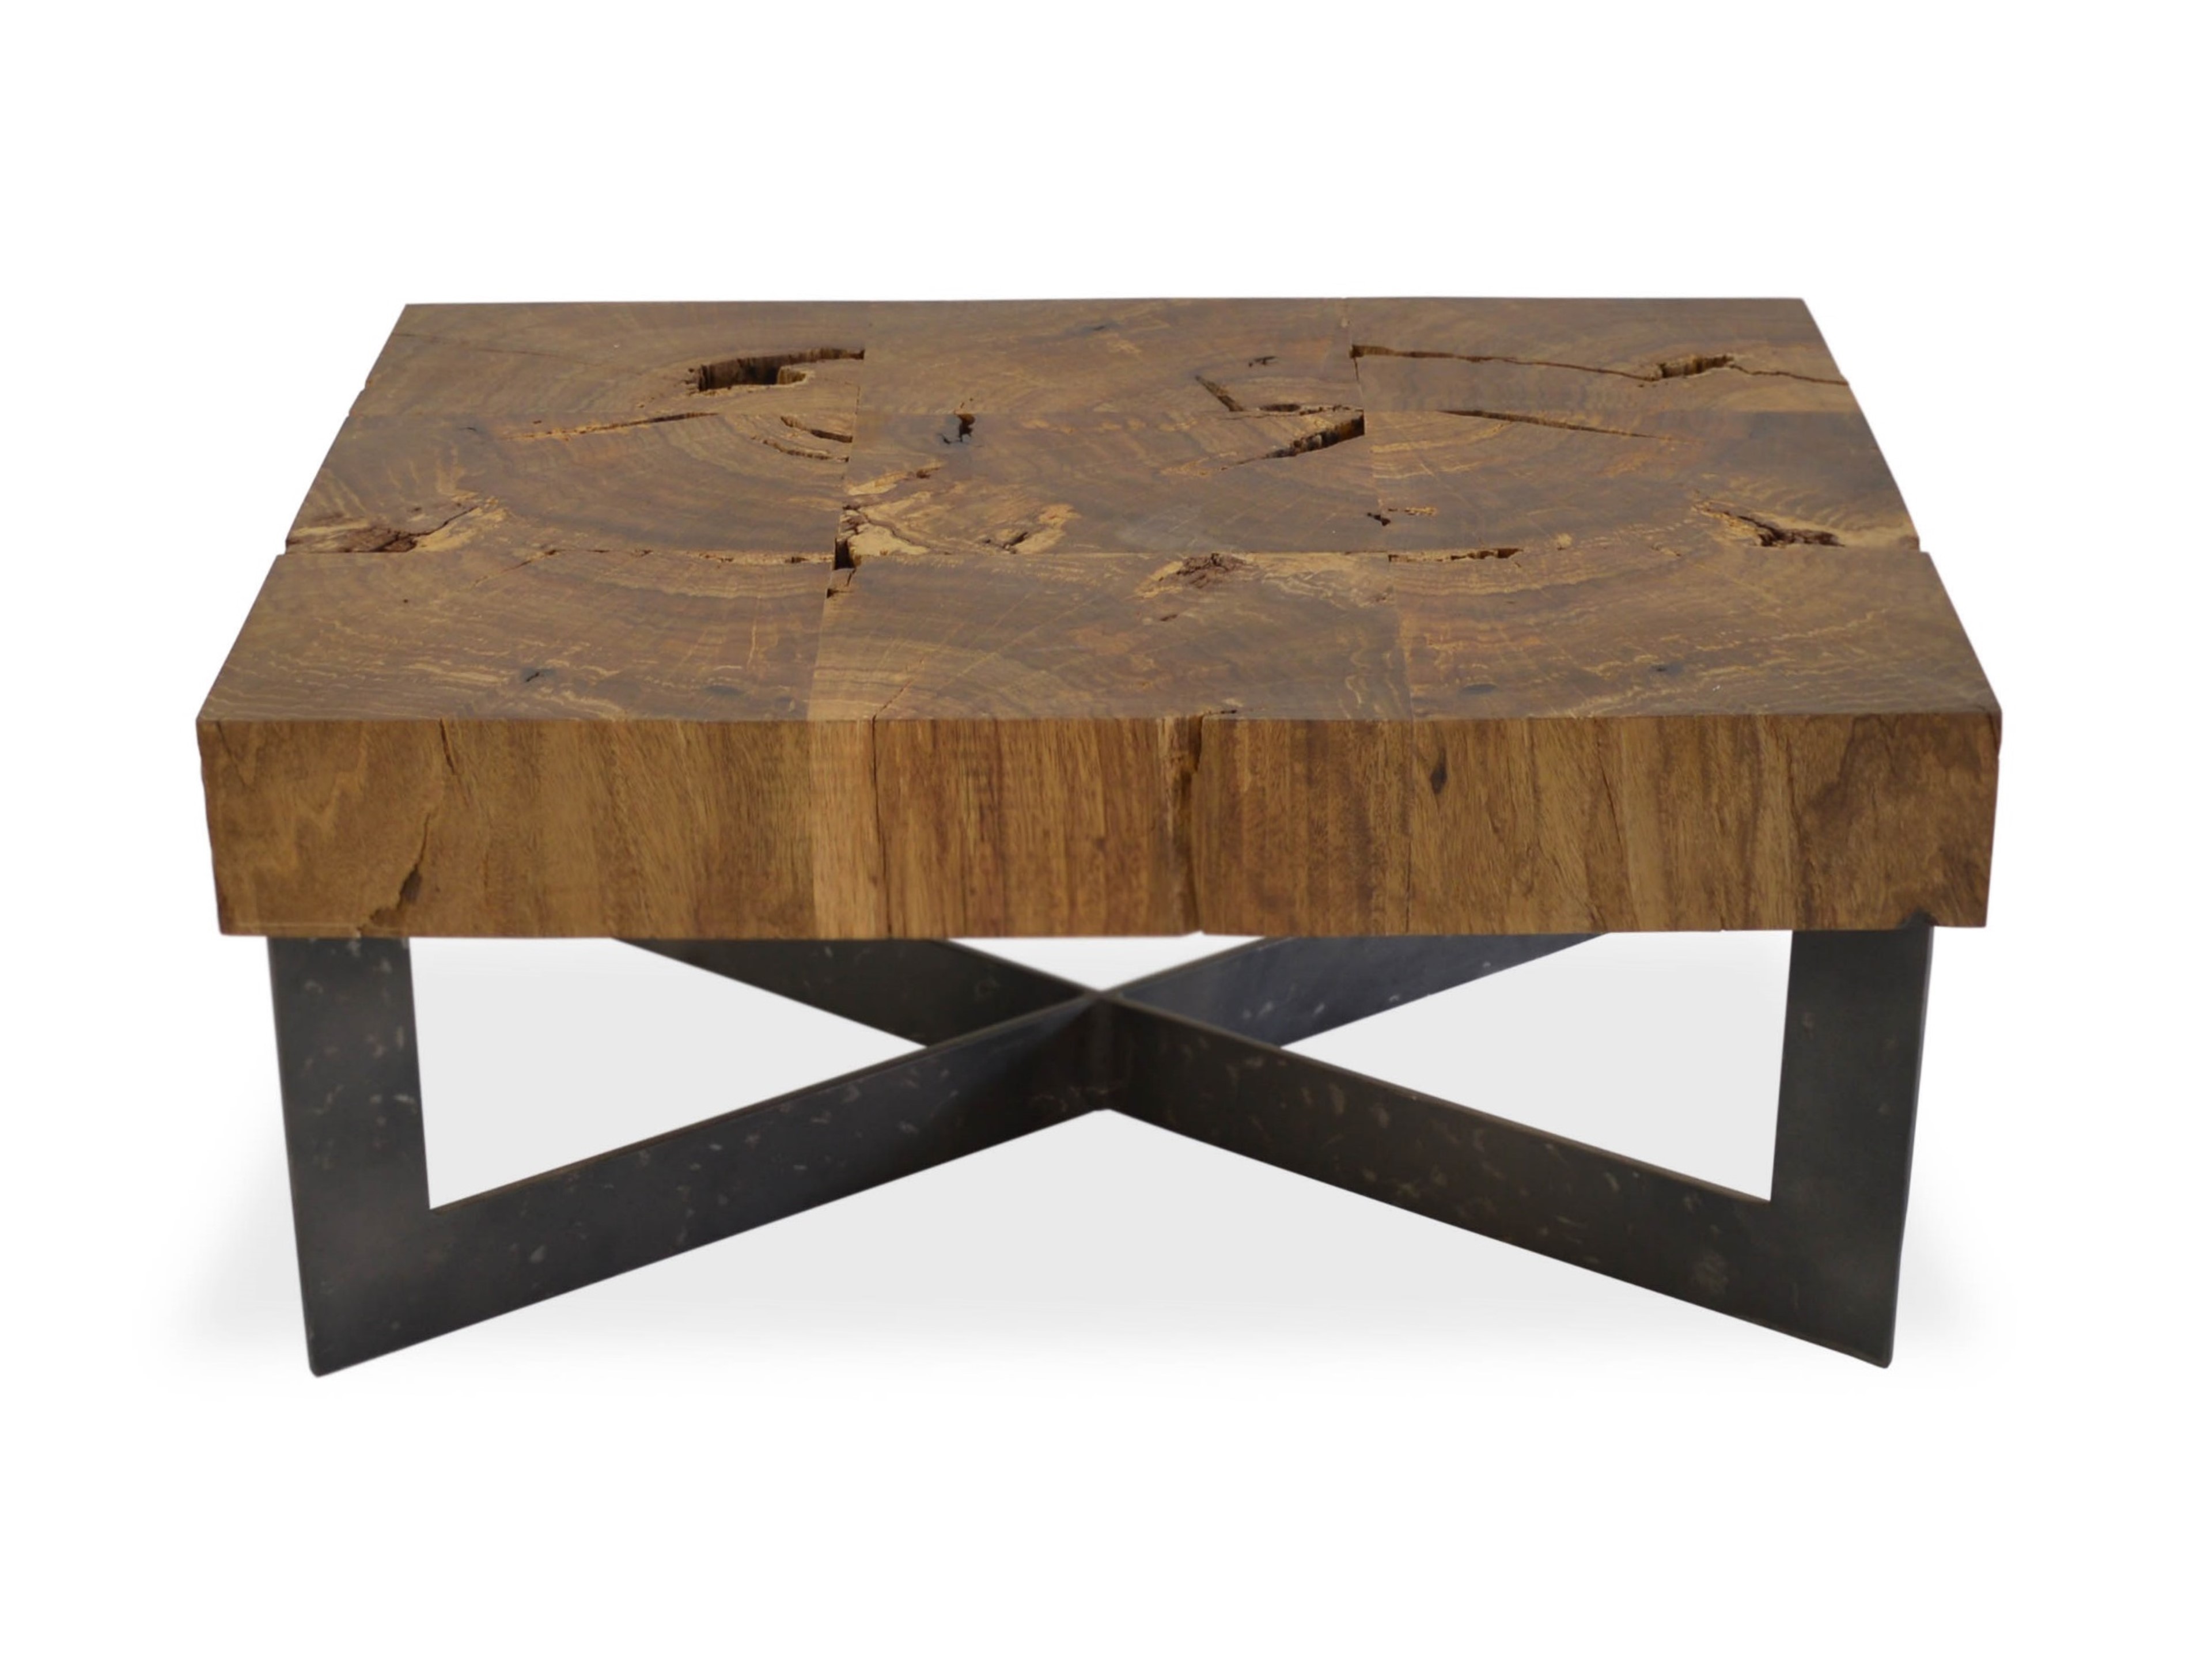 wood furniture creative metal and reclaimed old barn glass side tables for living room coffee table corner accent with drawer full size circular cotton tablecloths ifrane end